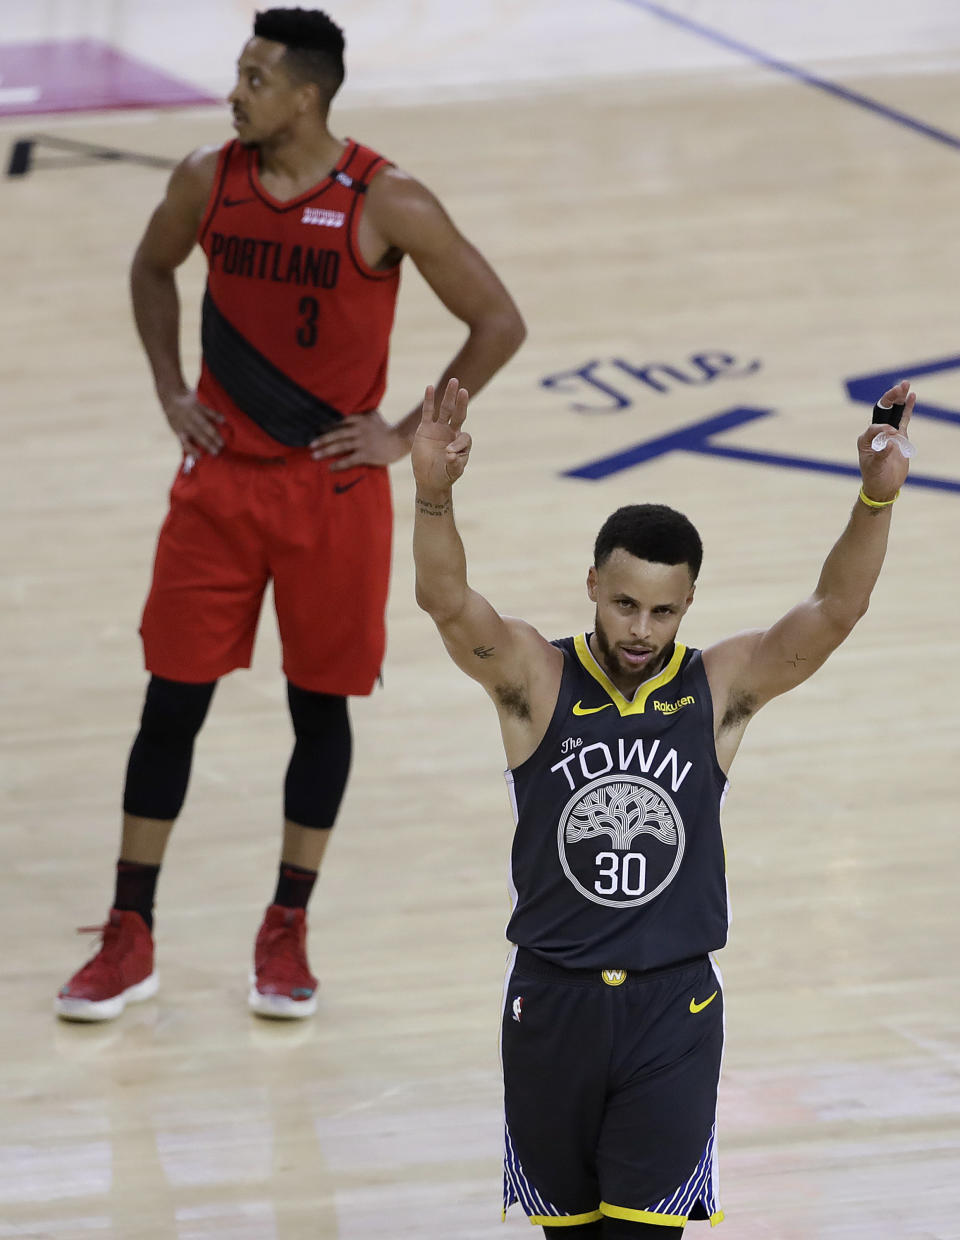 Golden State Warriors guard Stephen Curry (30) celebrates in front of Portland Trail Blazers guard CJ McCollum (3) during the second half of Game 2 of the NBA basketball playoffs Western Conference finals in Oakland, Calif., Thursday, May 16, 2019. (AP Photo/Ben Margot)